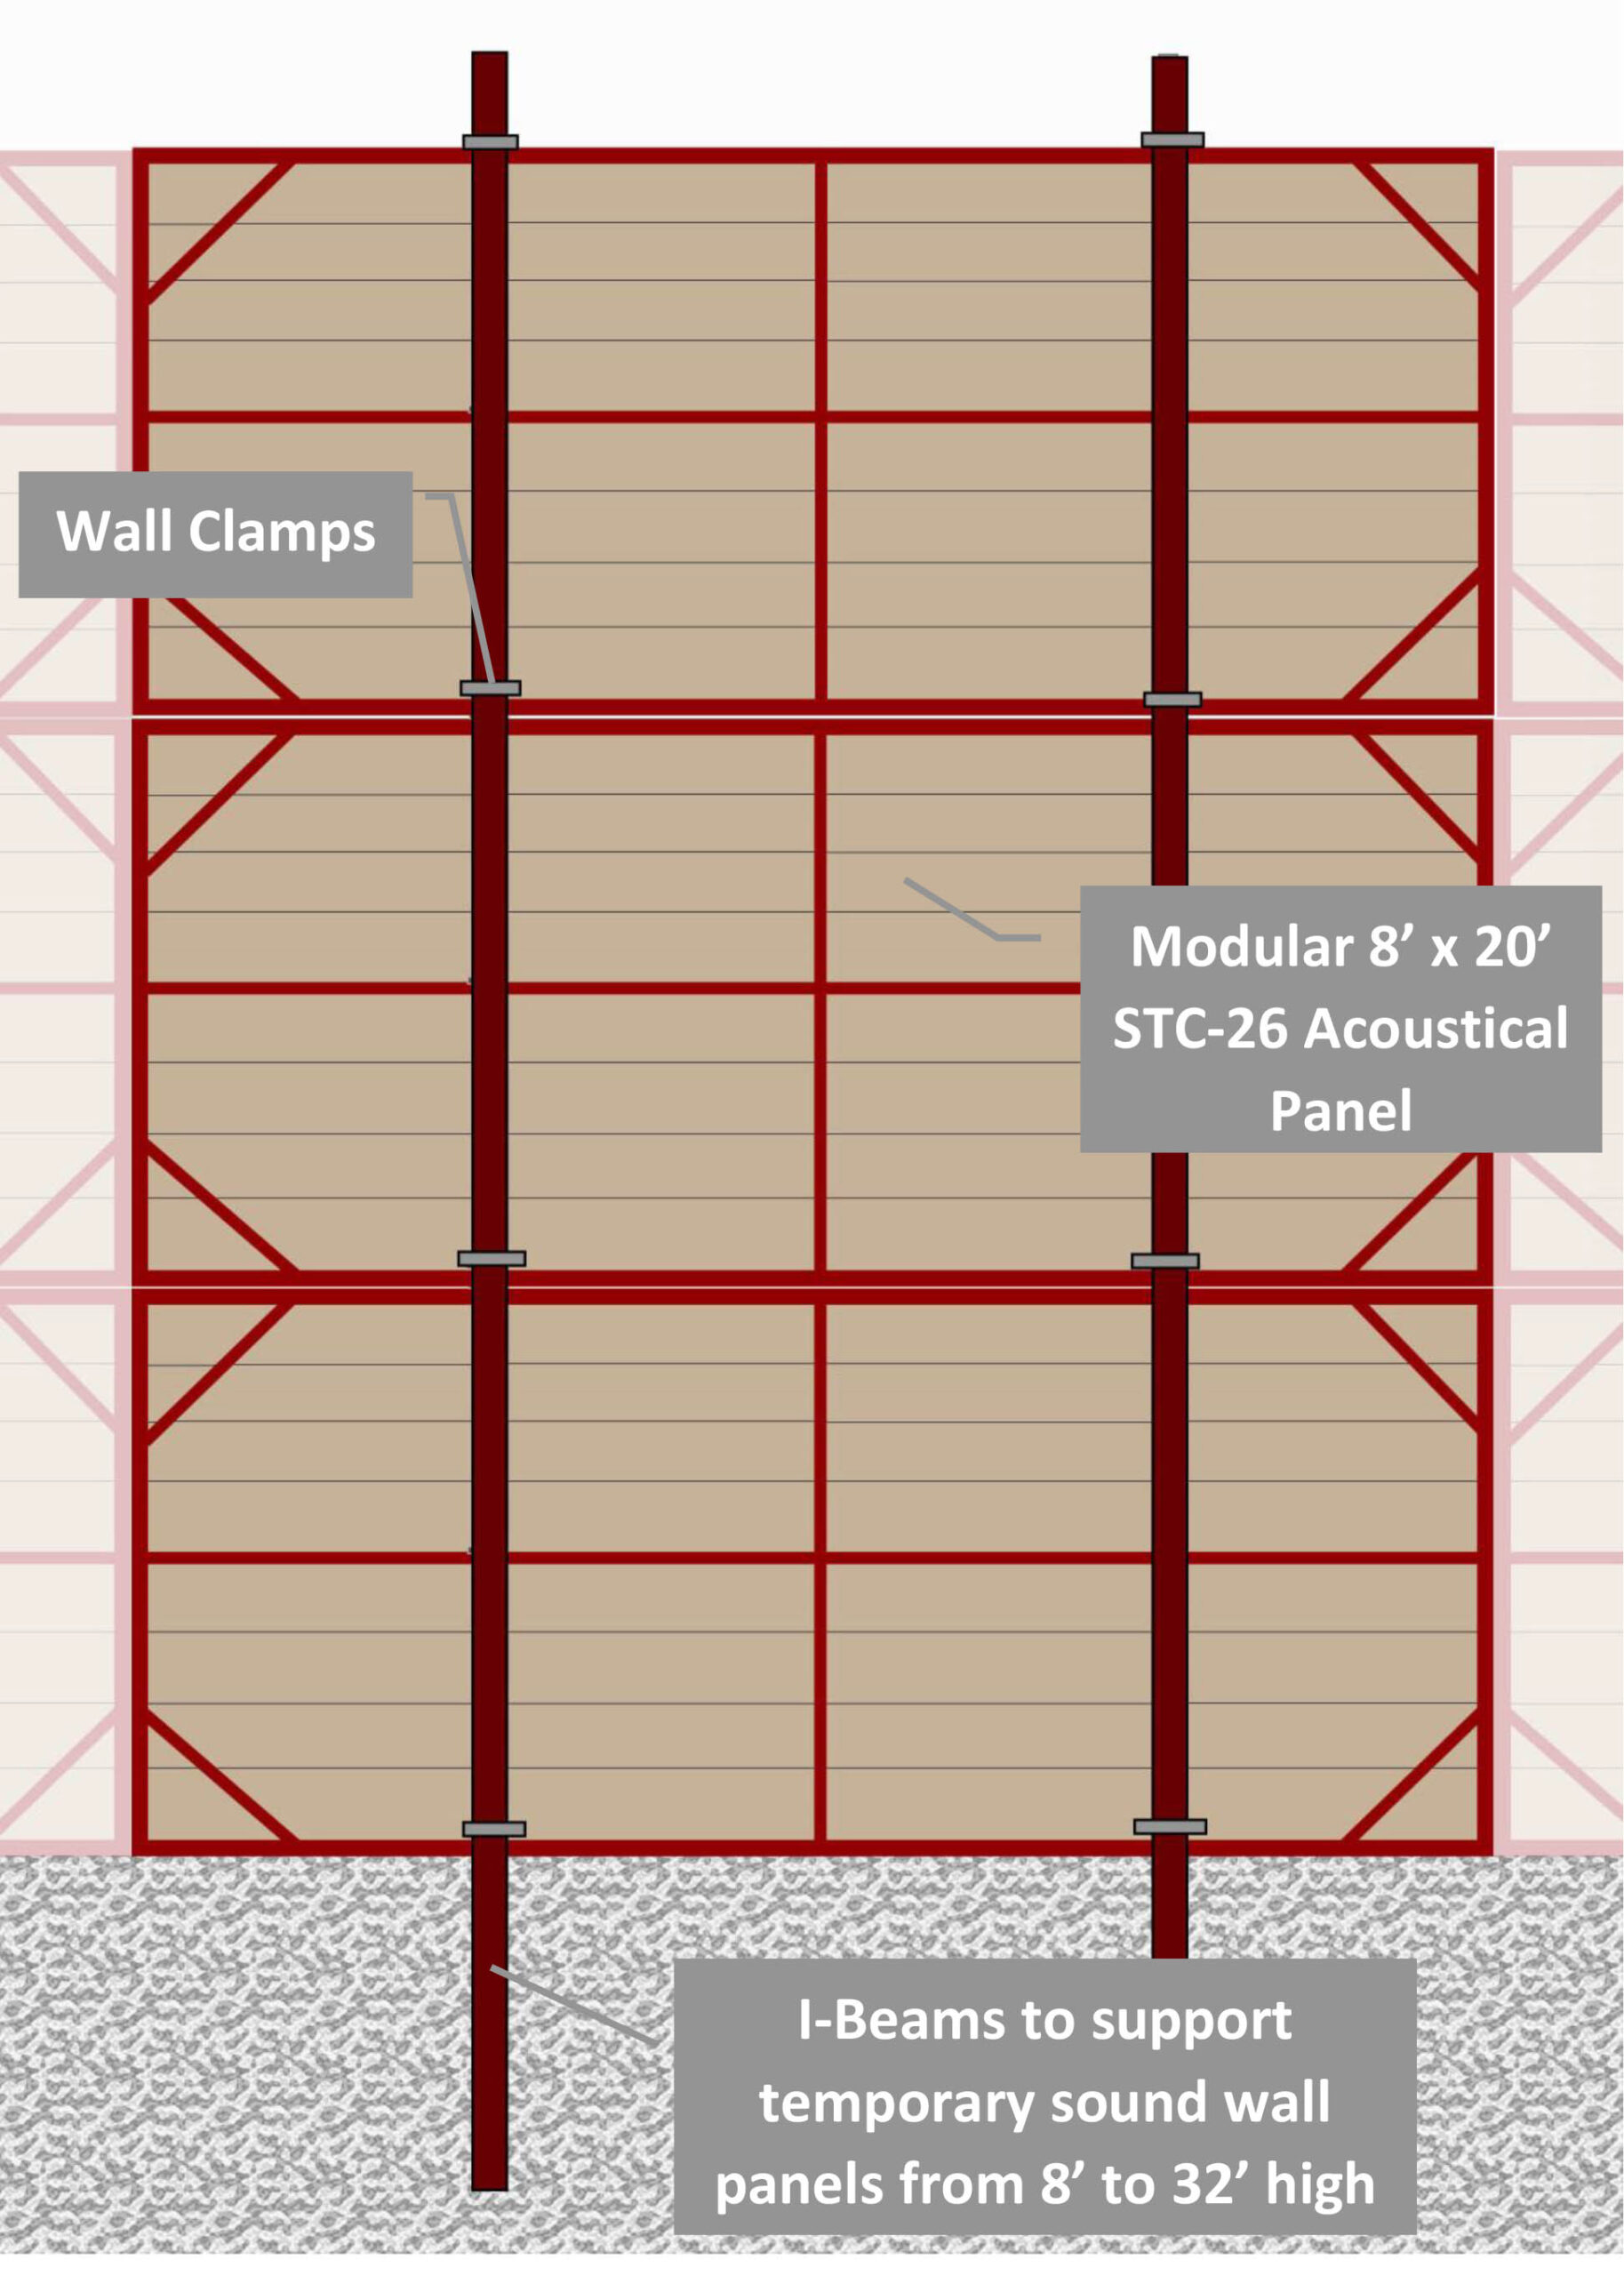 24 ft temporary sound wall diagram